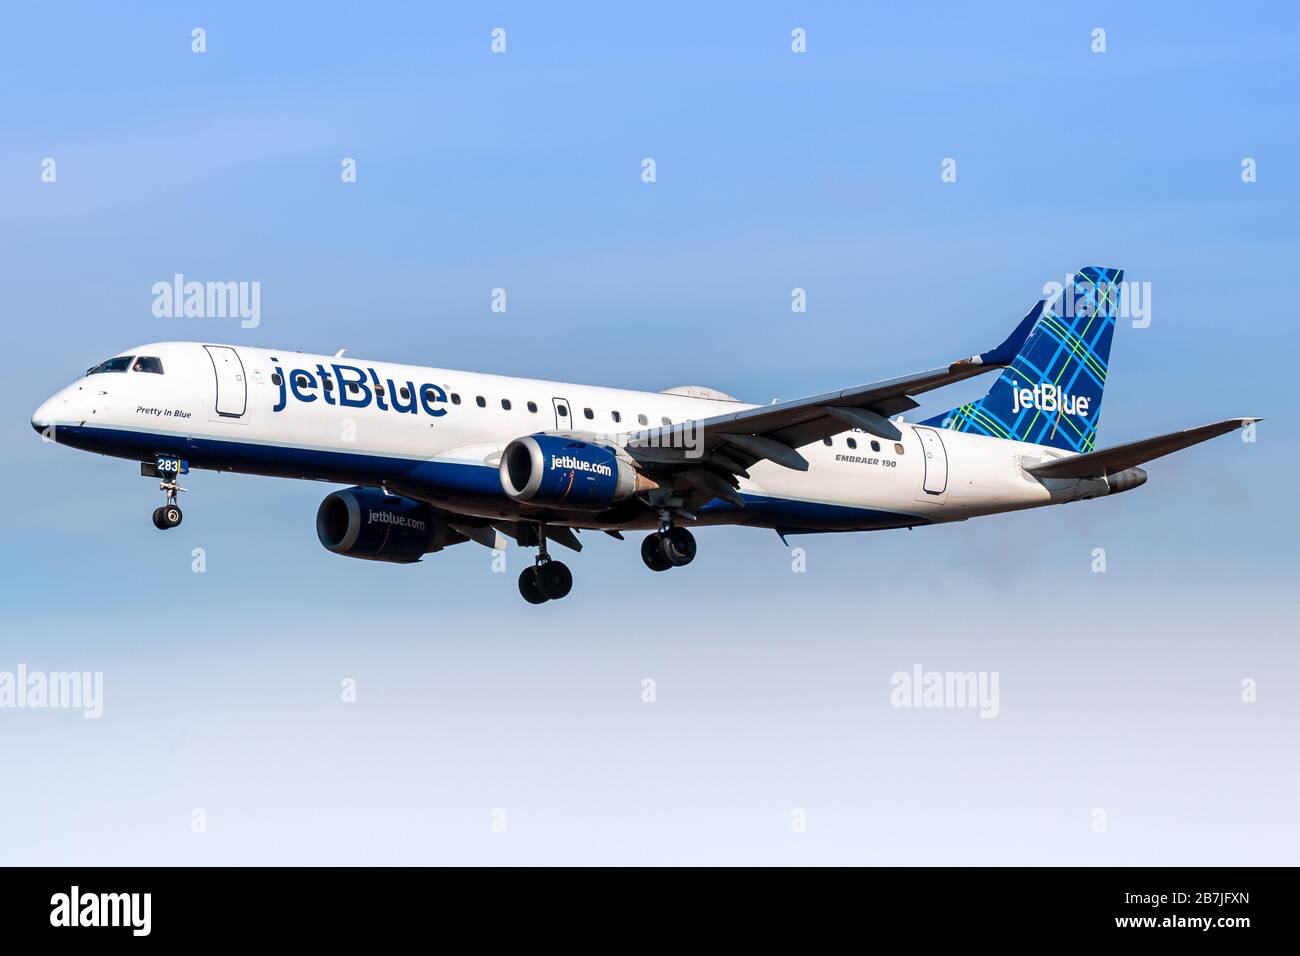 New York, USA - February 29, 2020: JetBlue Embraer 190 airplane at New York John F. Kennedy airport (JFK) in the USA. Embraer is an aircraft manufactu Stock Photo